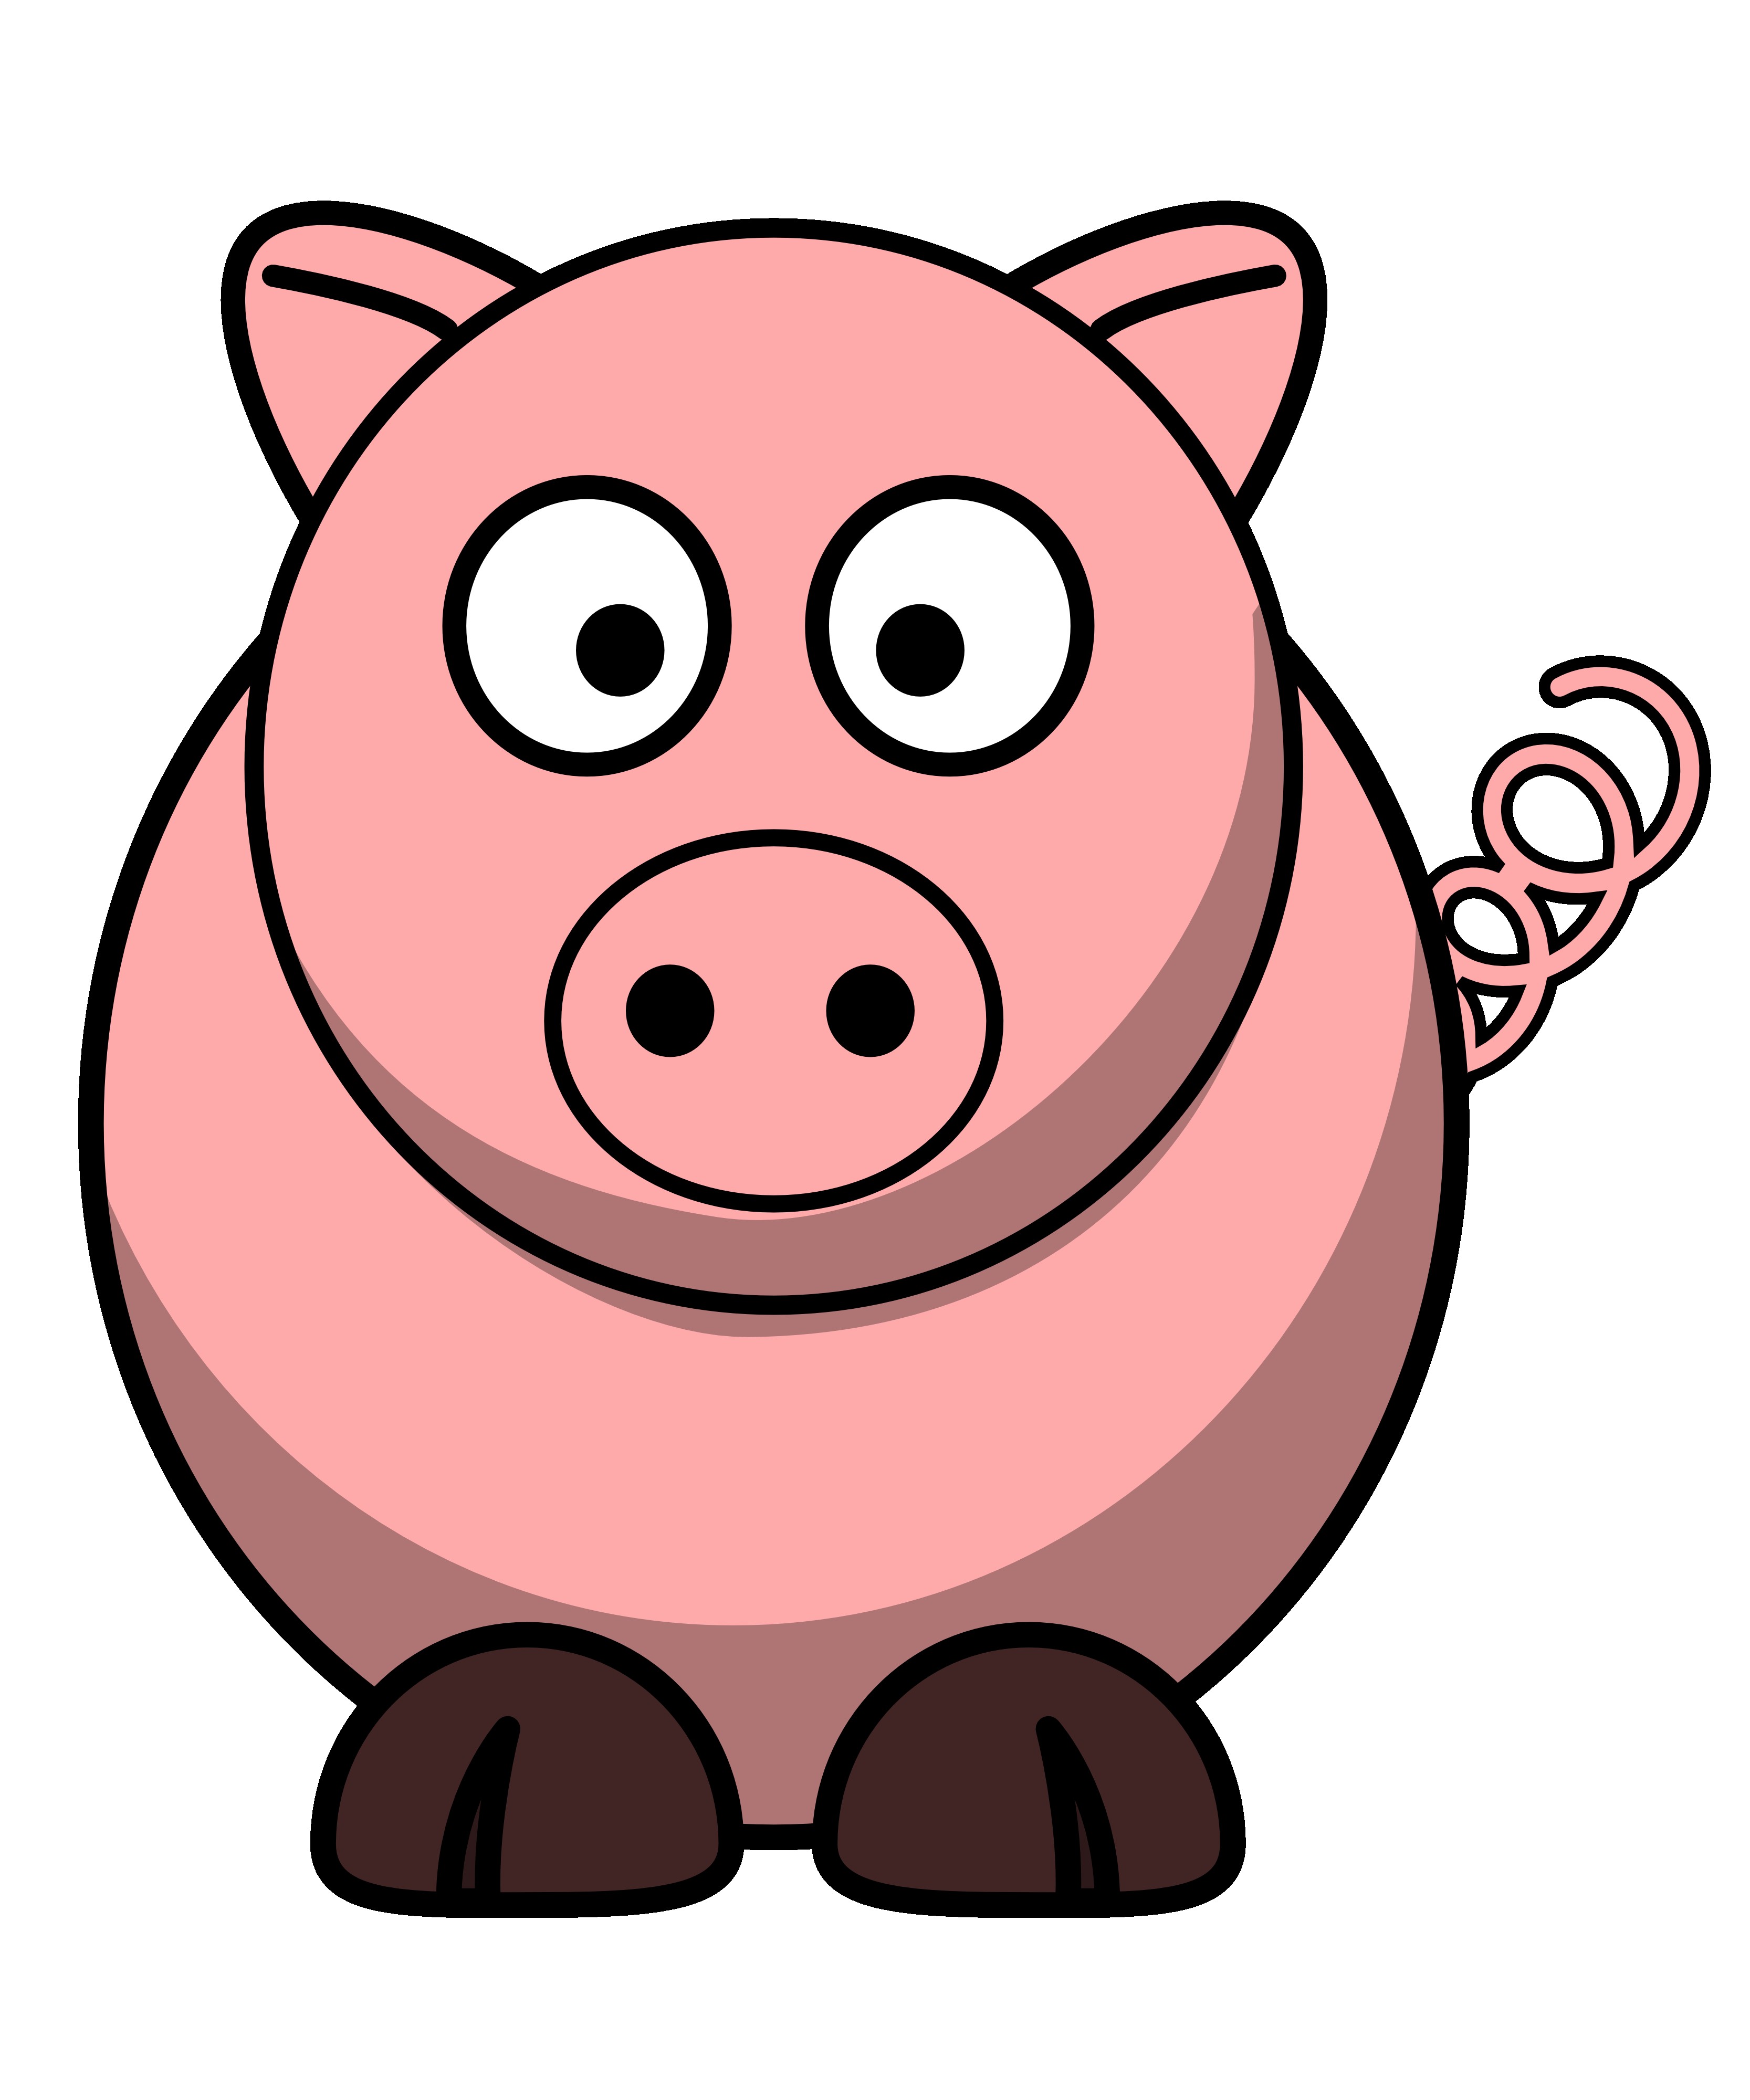 Pig Clip Art | Clipart library - Free Clipart Images